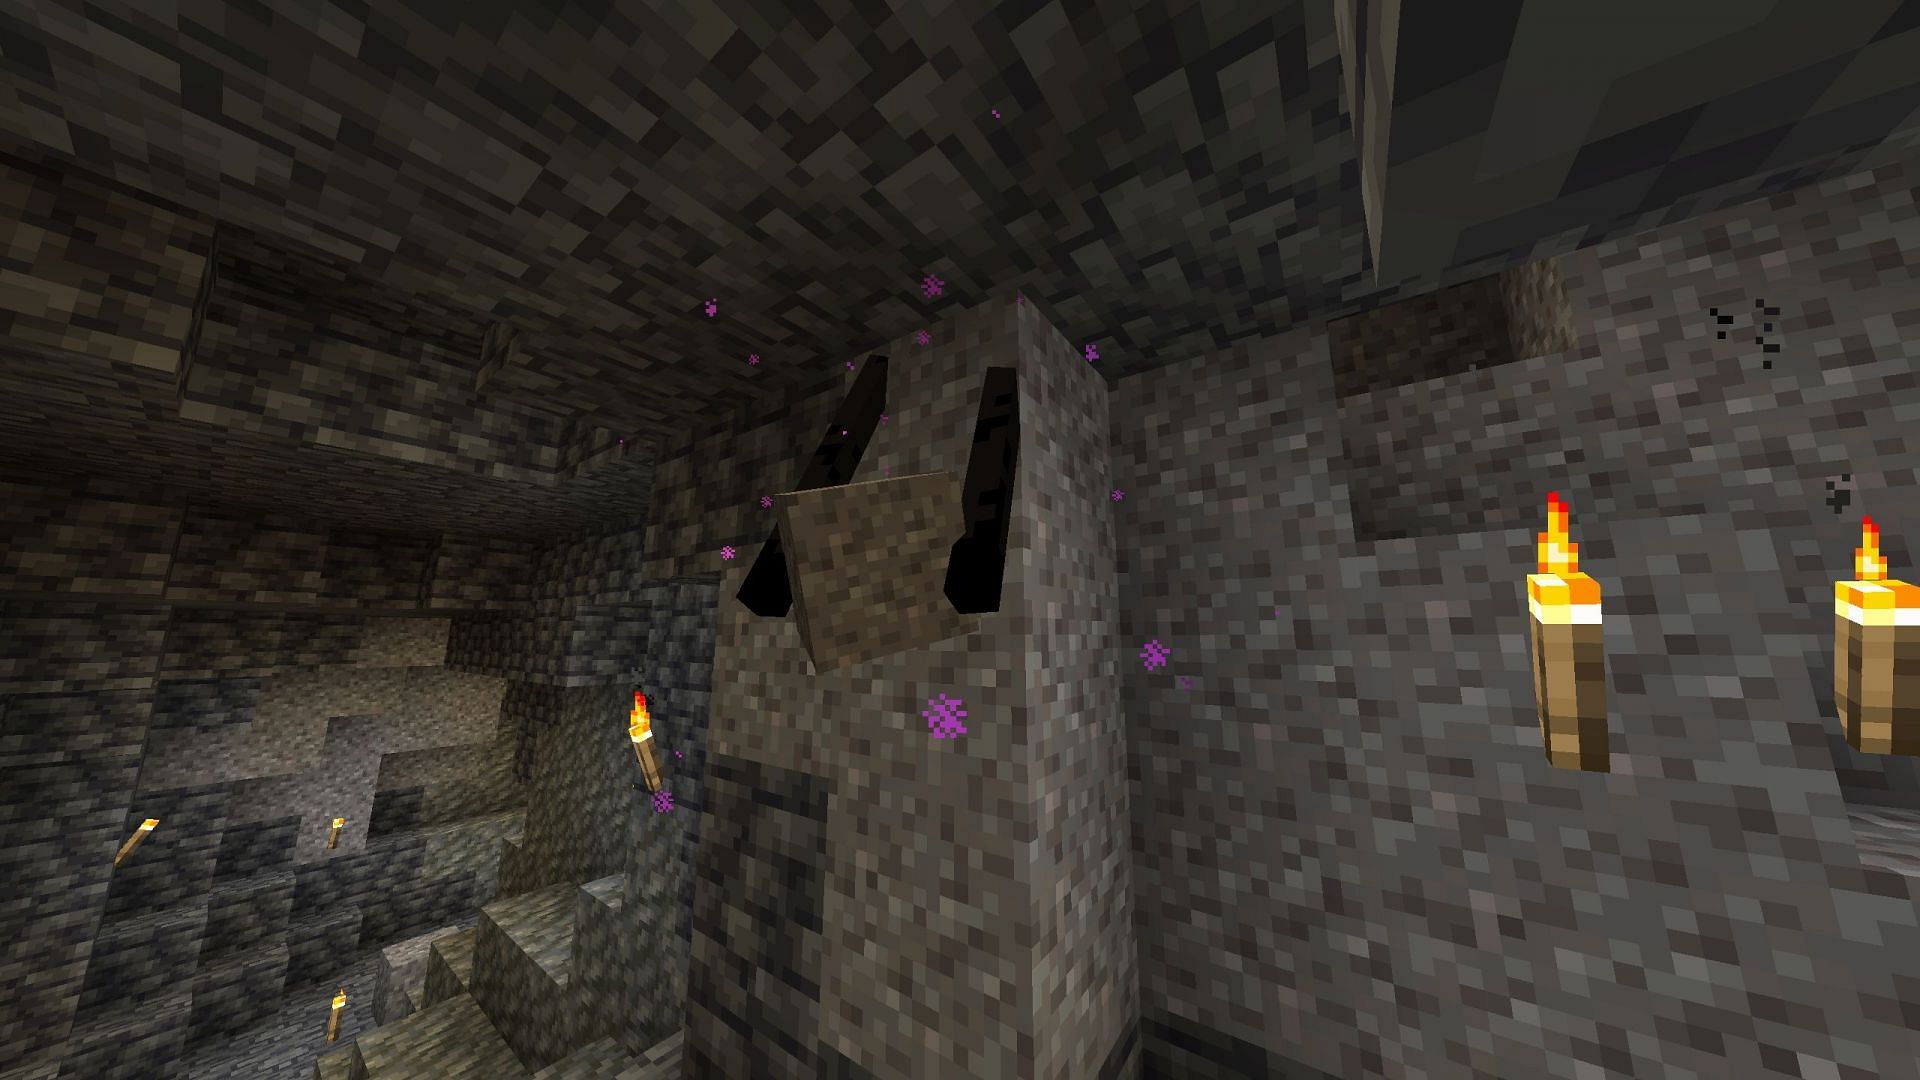 A Minecraft Redditor shared this funny photo of an Enderman caught in a very uncertain situation (Image via u/Jesselle/Reddit)